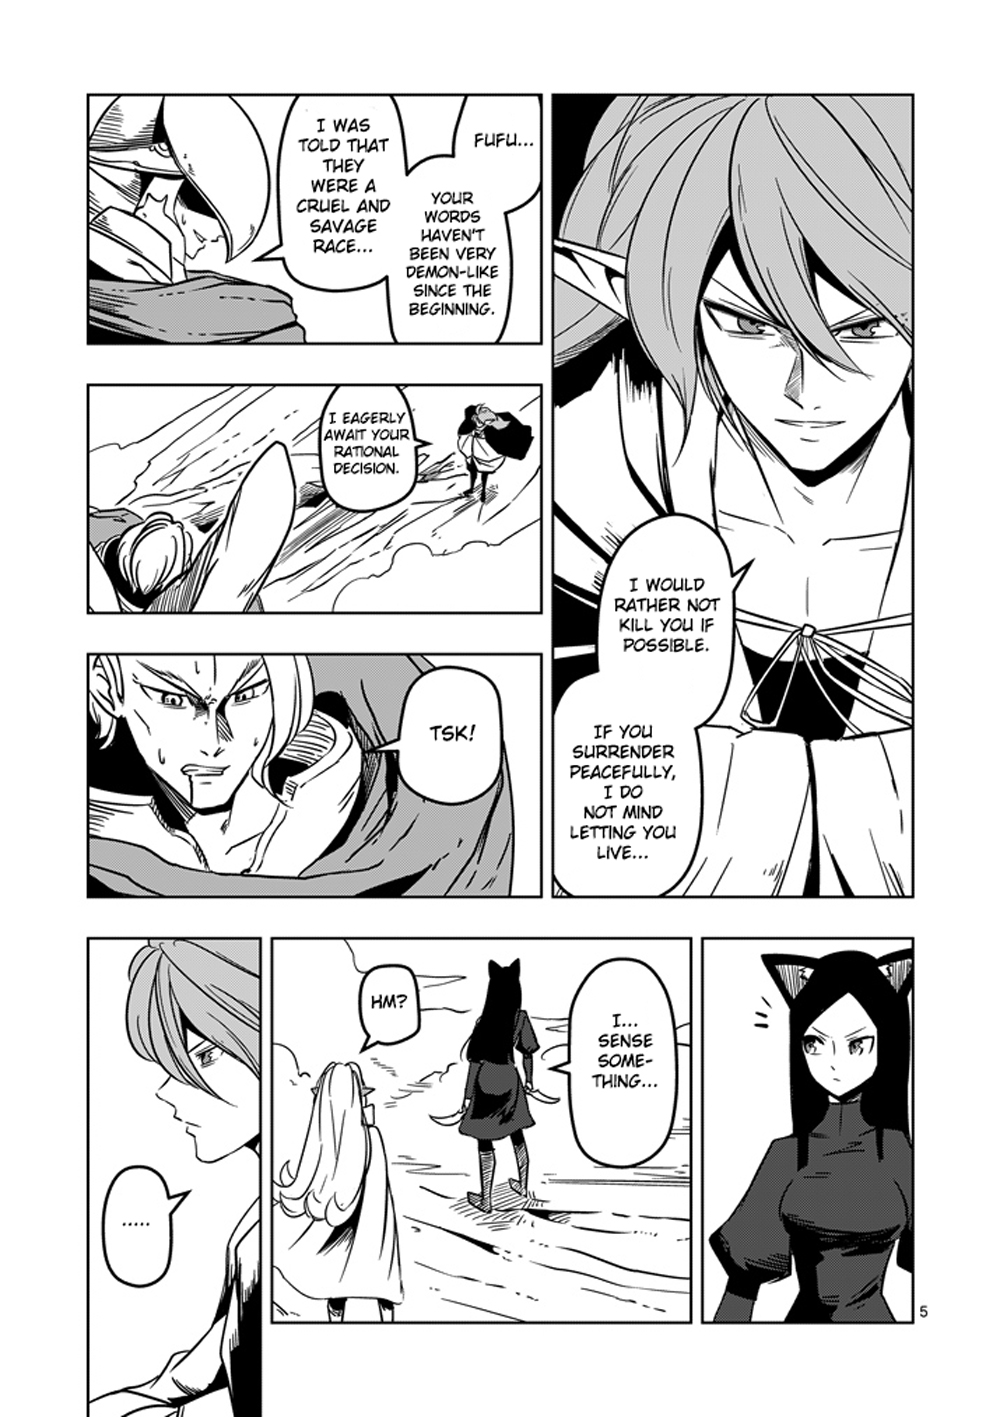 Helck Ch.19